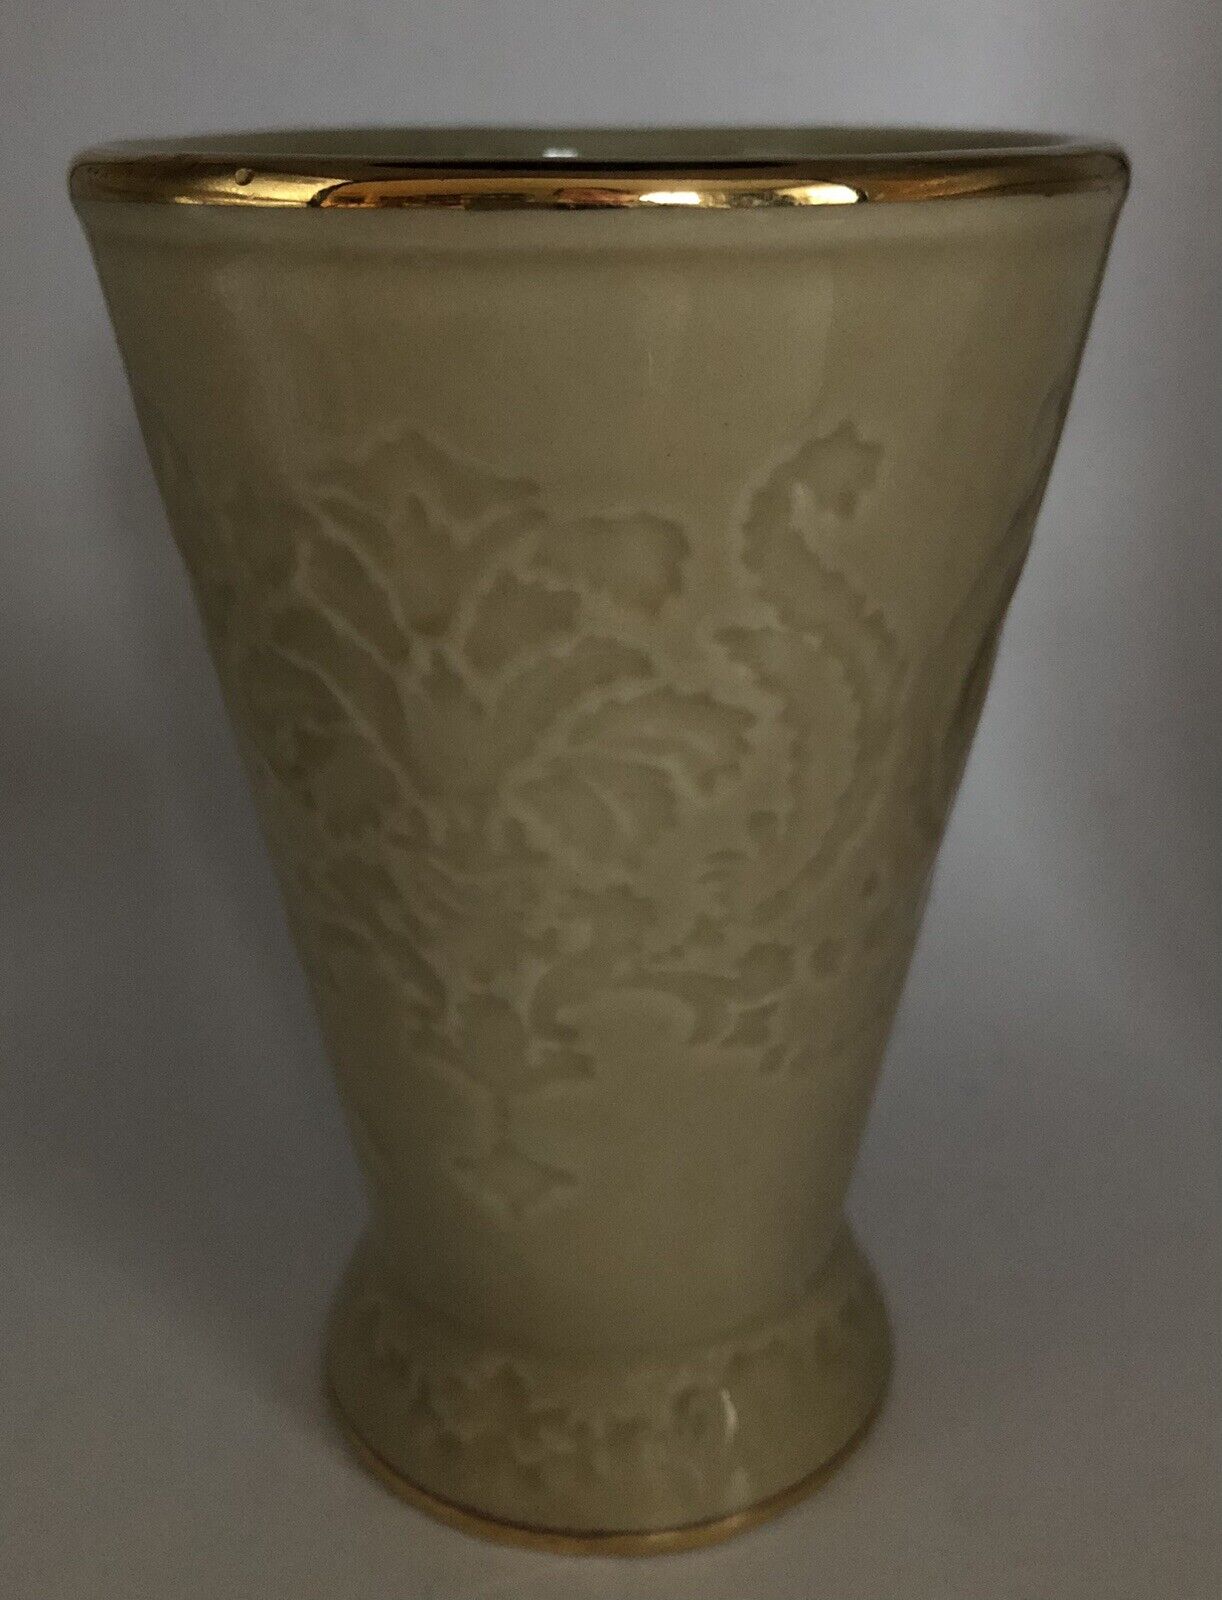 Vintage Nicole Miller, Ny Creame Colored Vase With Gold Trim 